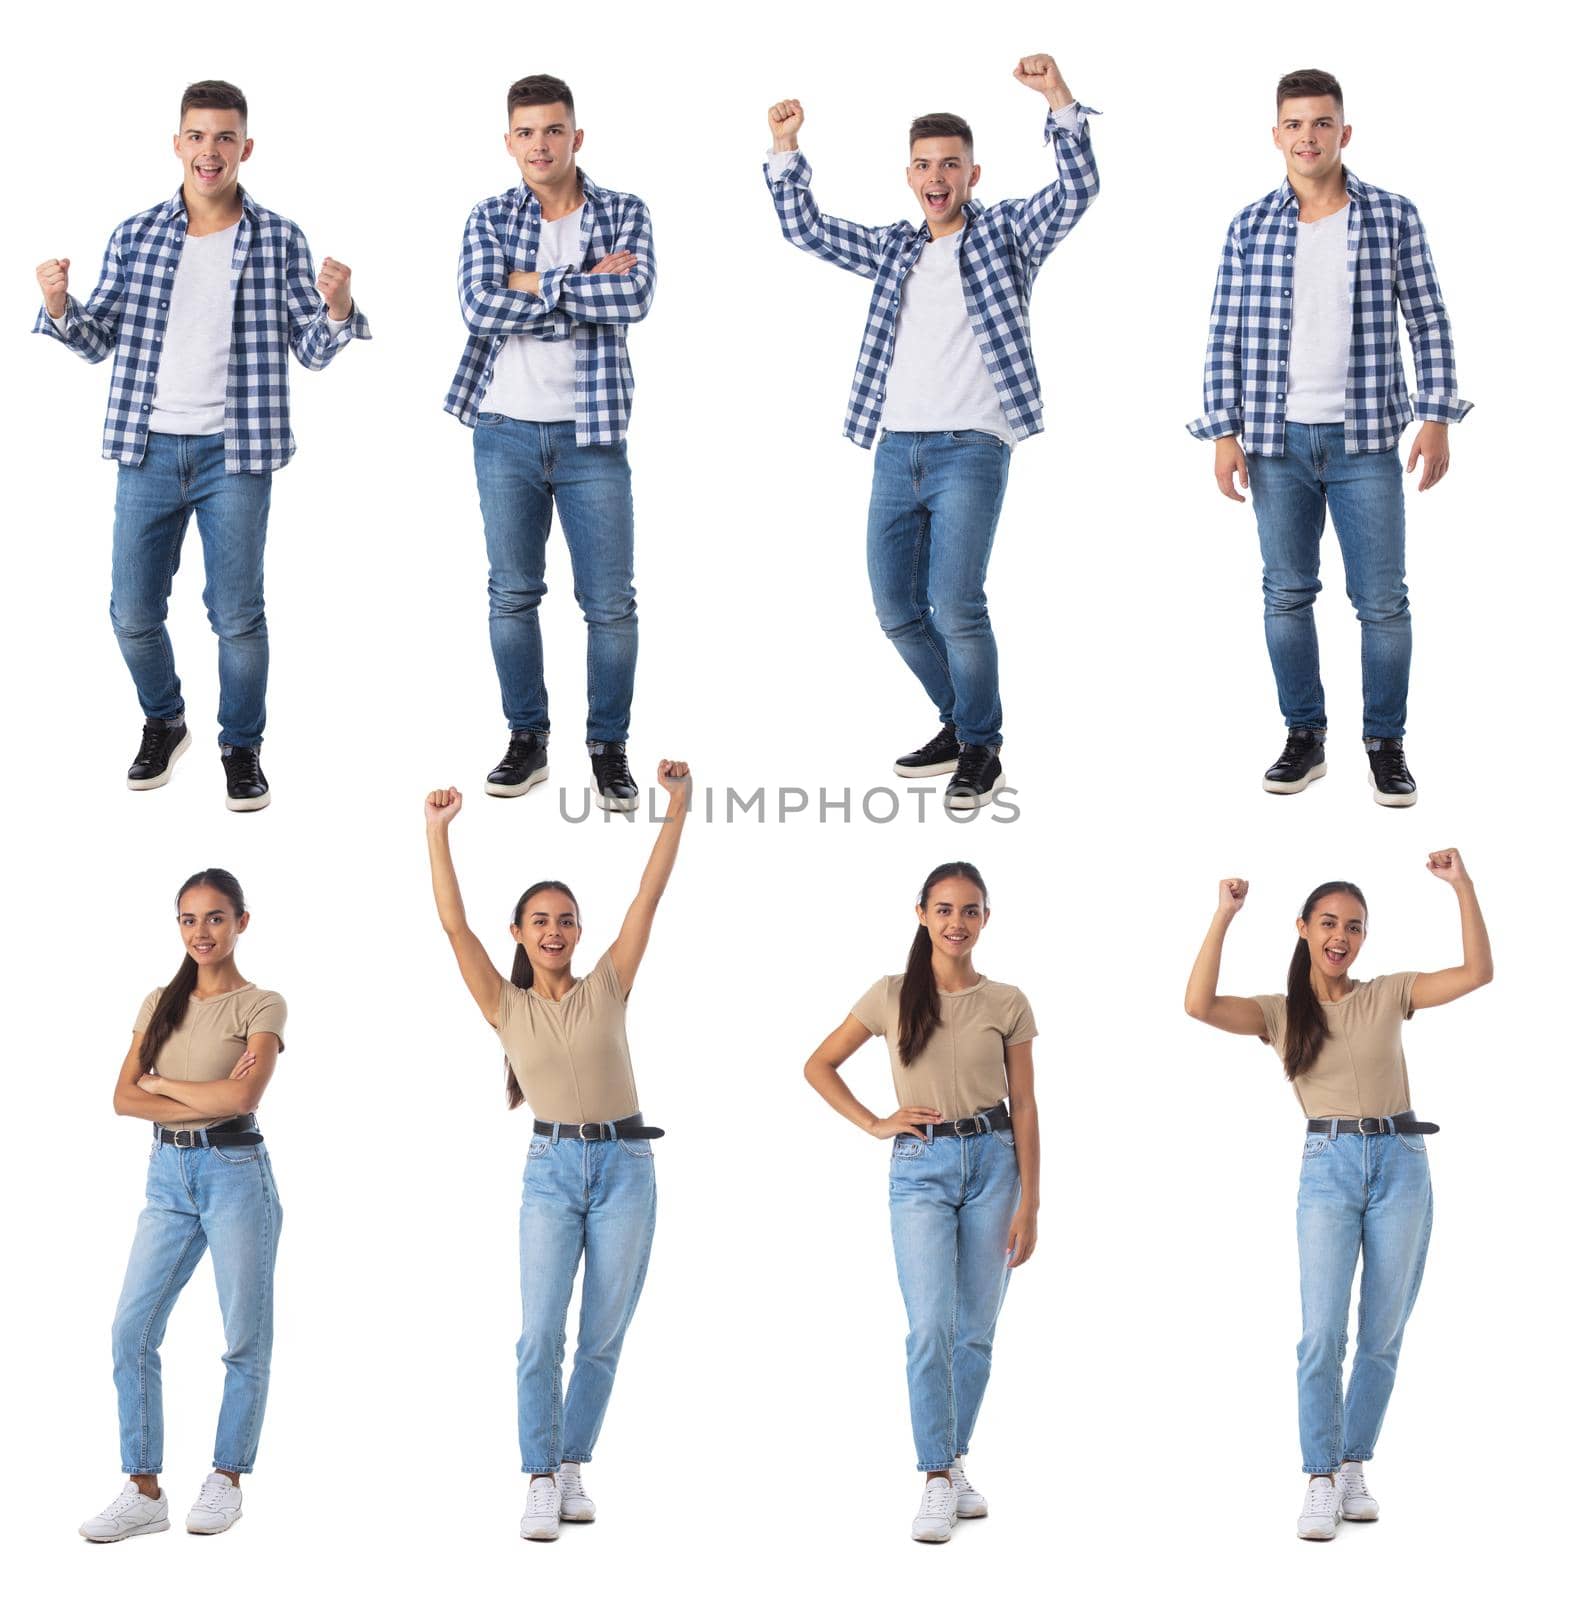 Set of young man and woman portraits, different expressions, design elements isolated on white background